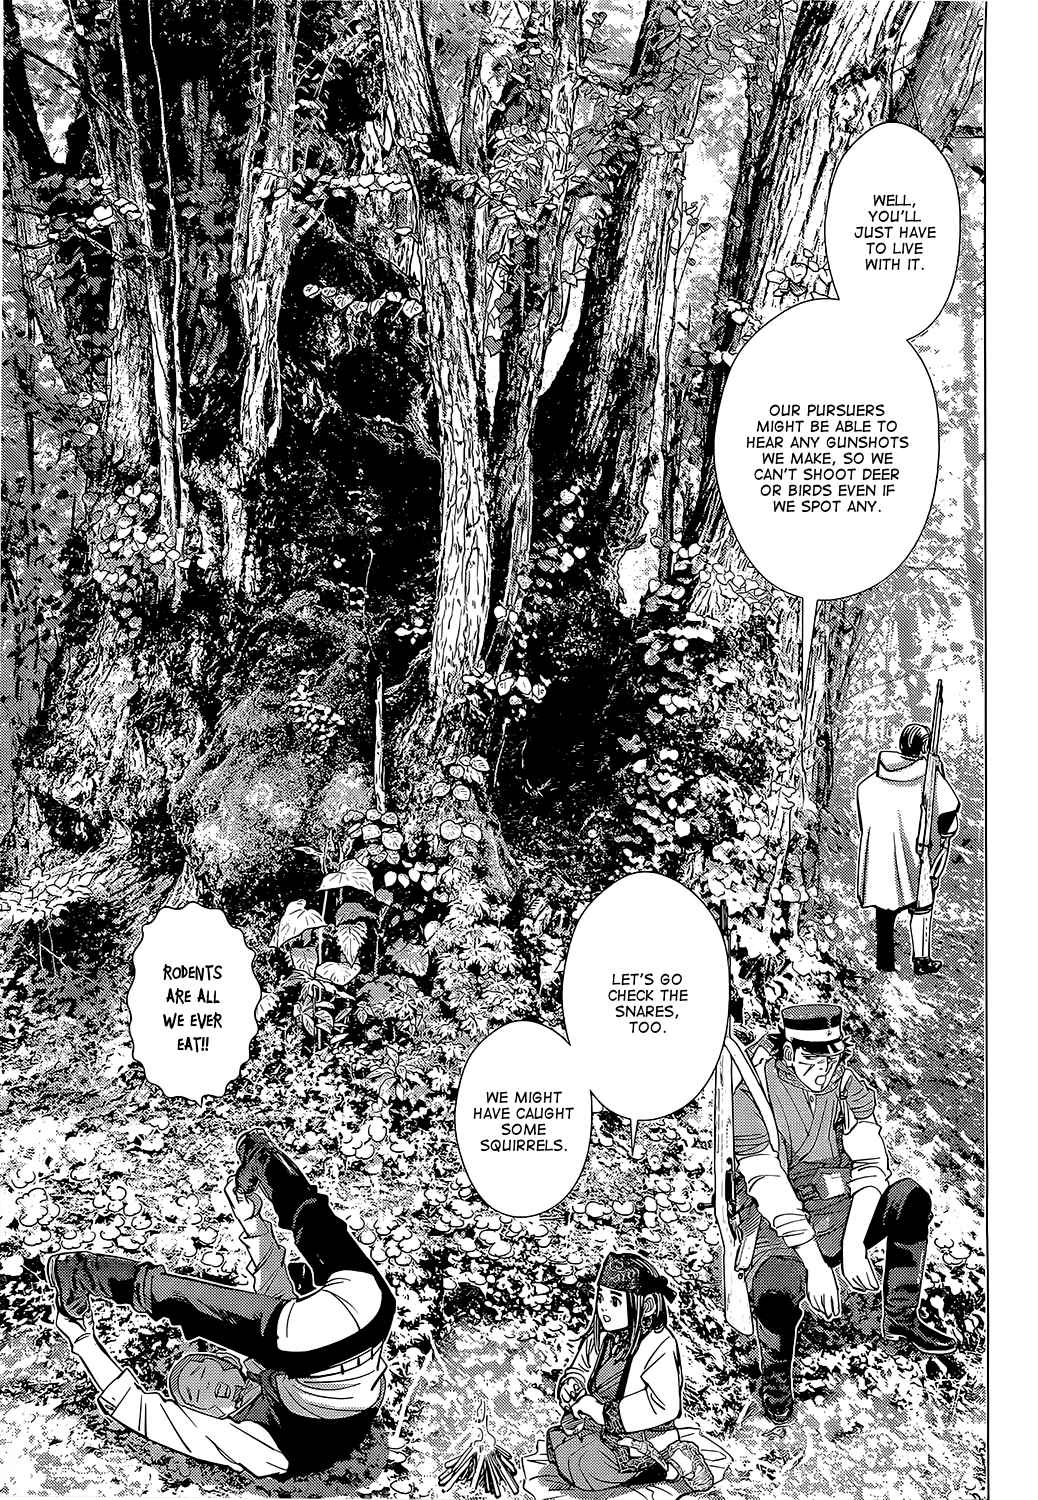 Golden Kamuy Ch.103